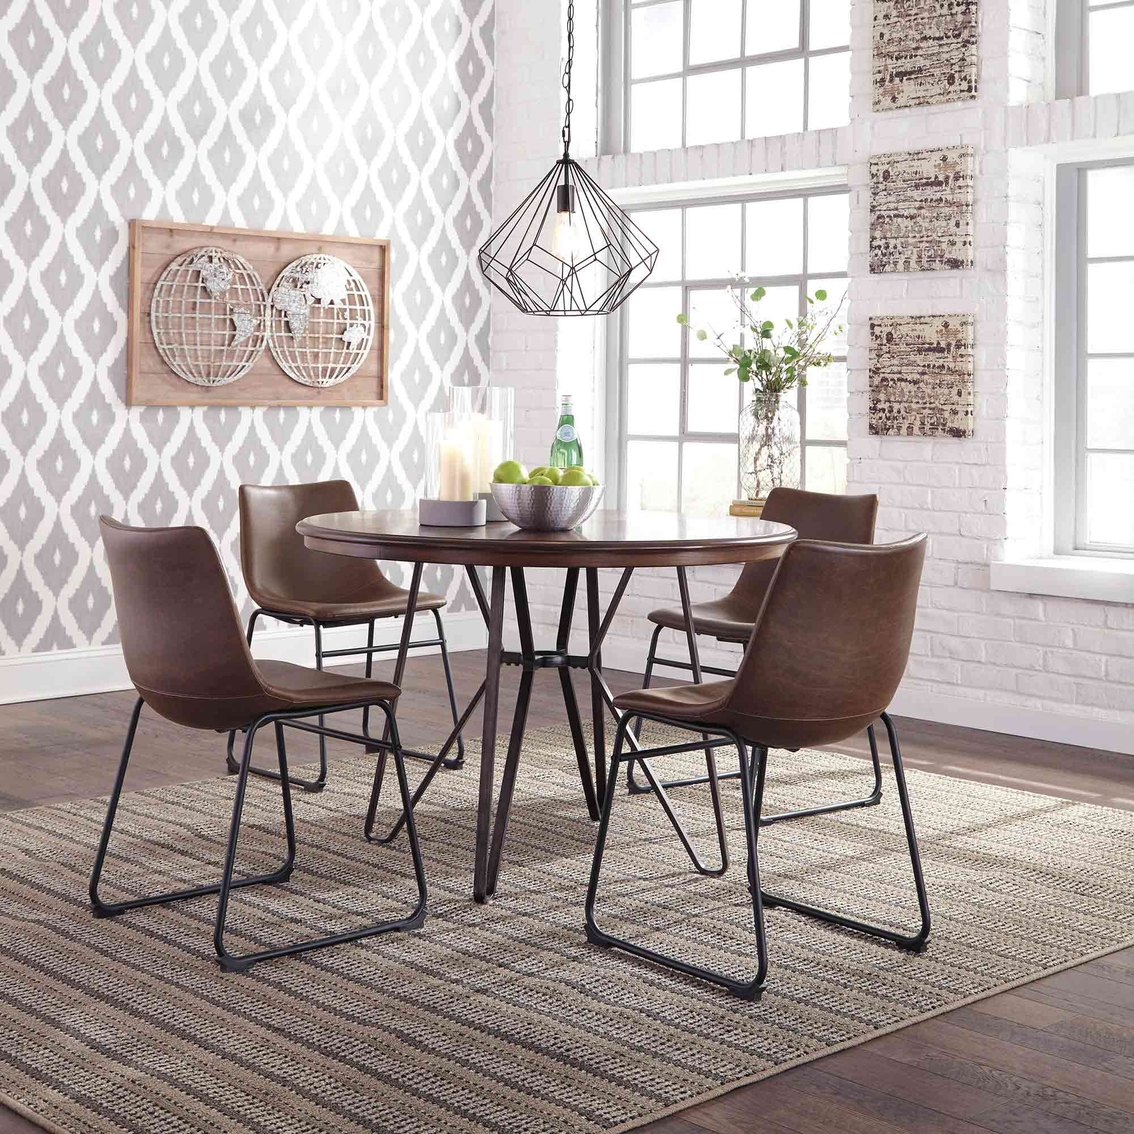 Signature Design by Ashley Centiar Dining Room Upholstered Side Chair 2 Pk. - Image 2 of 2